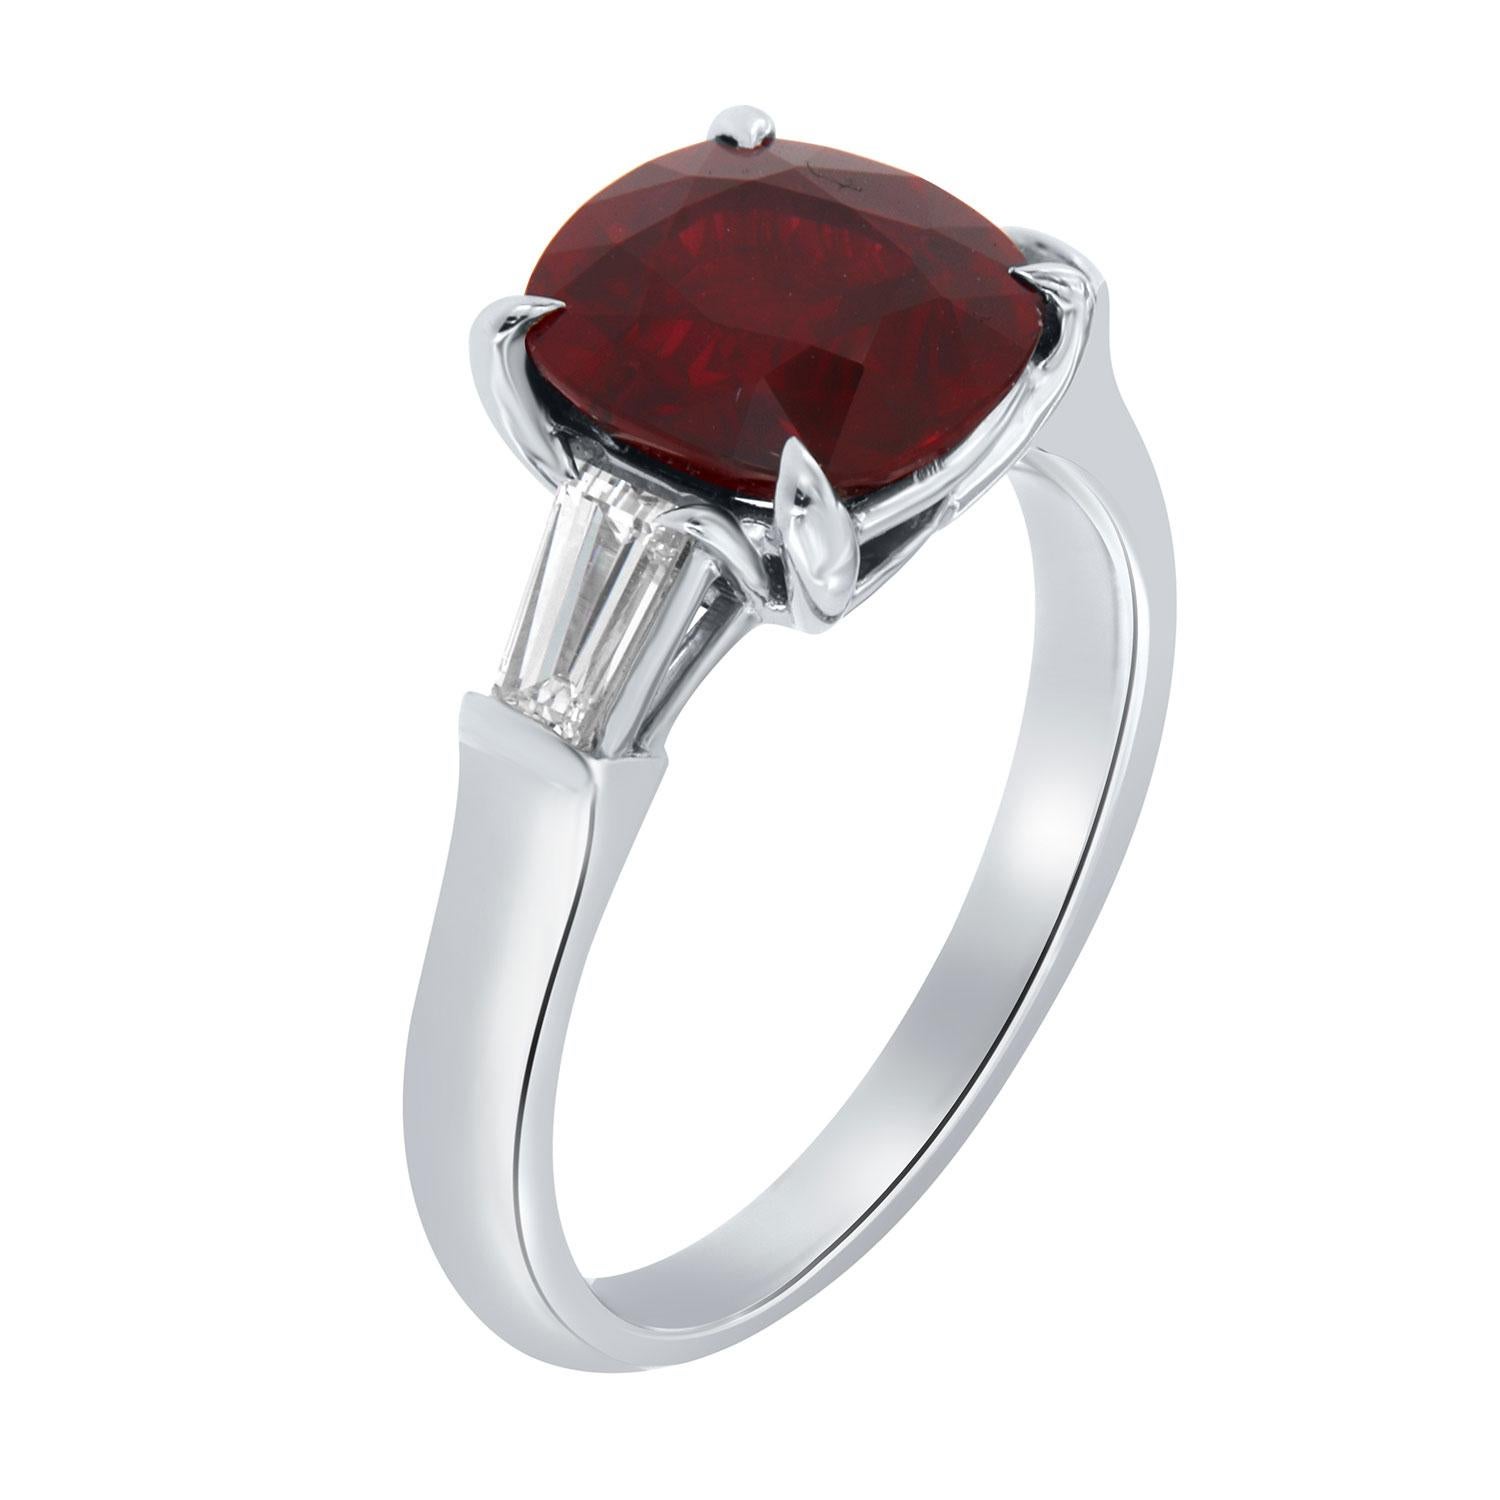 This timeless three-stone platinum ring features a one-of-a-kind square cushion 2.99 carat Red Ruby that exhibits a deep red vibrant color. in excellent luster. The Ruby is flanked by two tapered baguette-cut diamonds in weight of 0.53 carat.